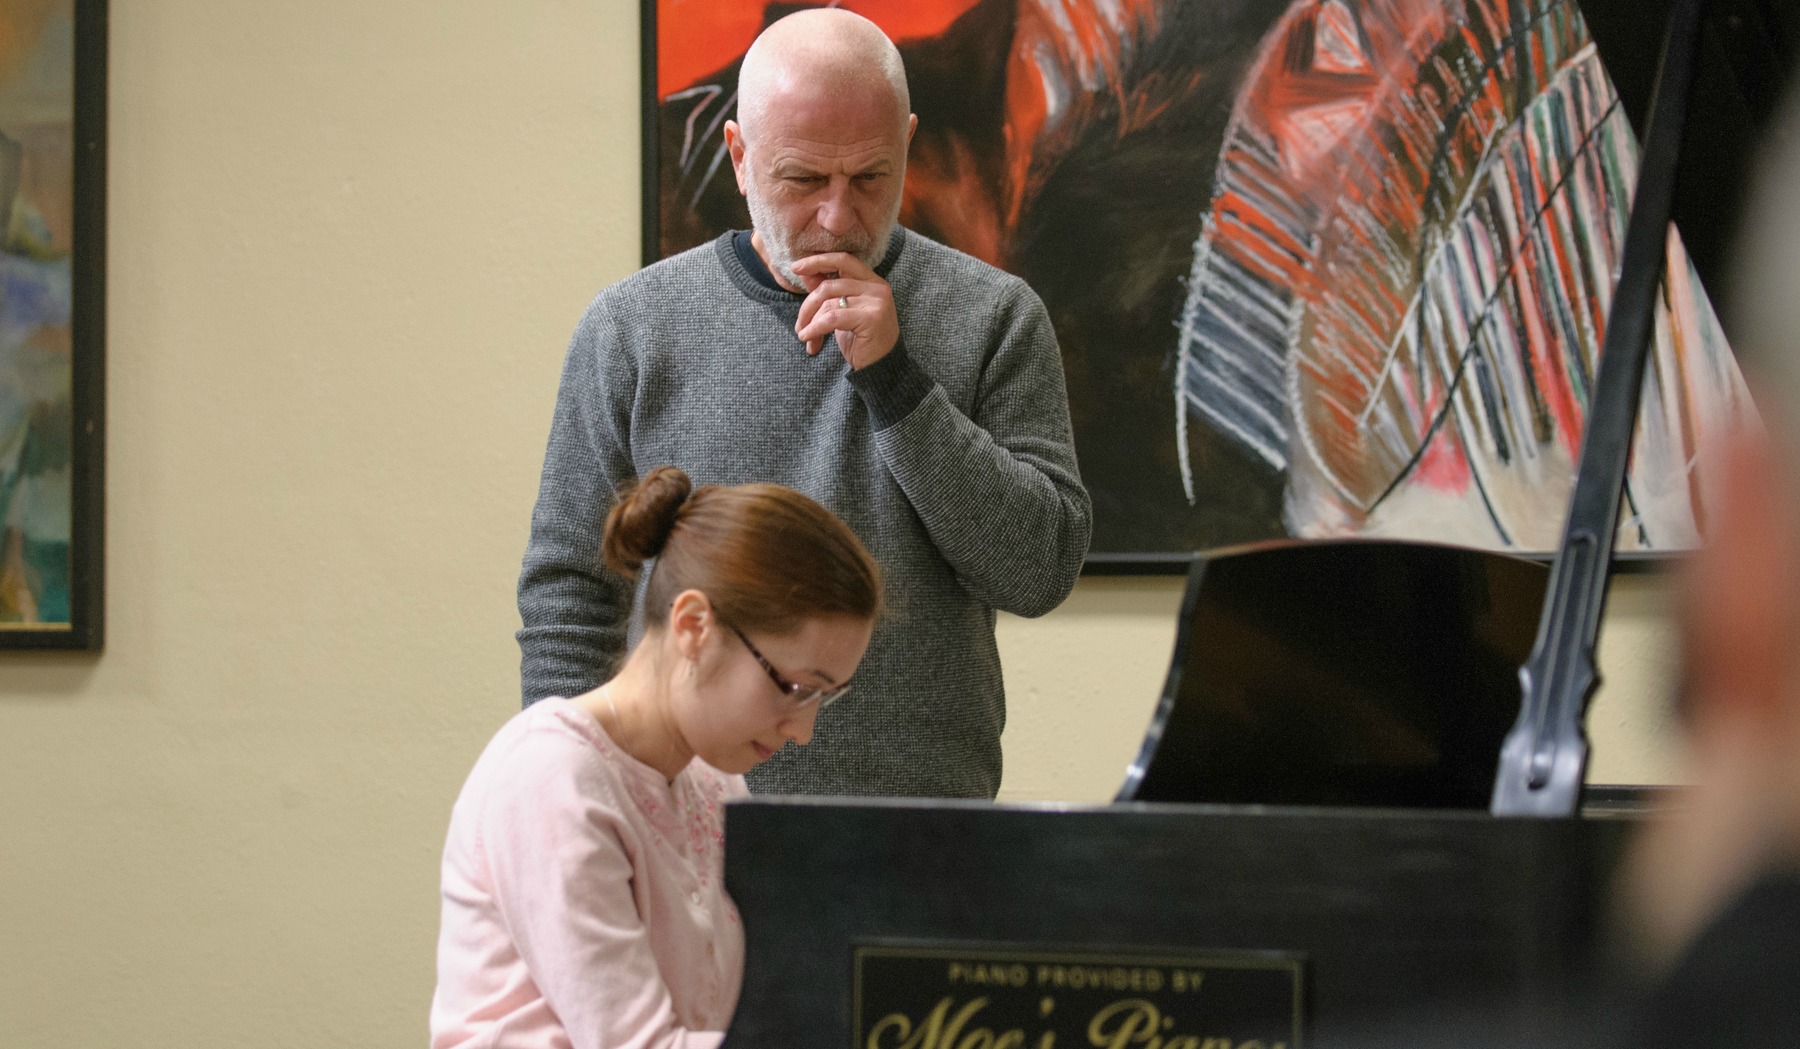 Natalie Burton '13 plays a Bach piece on the piano for master pianist Vladimir Feltsman during Portland Piano International's Up Close With the Masters series. (Photo courtesy of Portland Piano International)